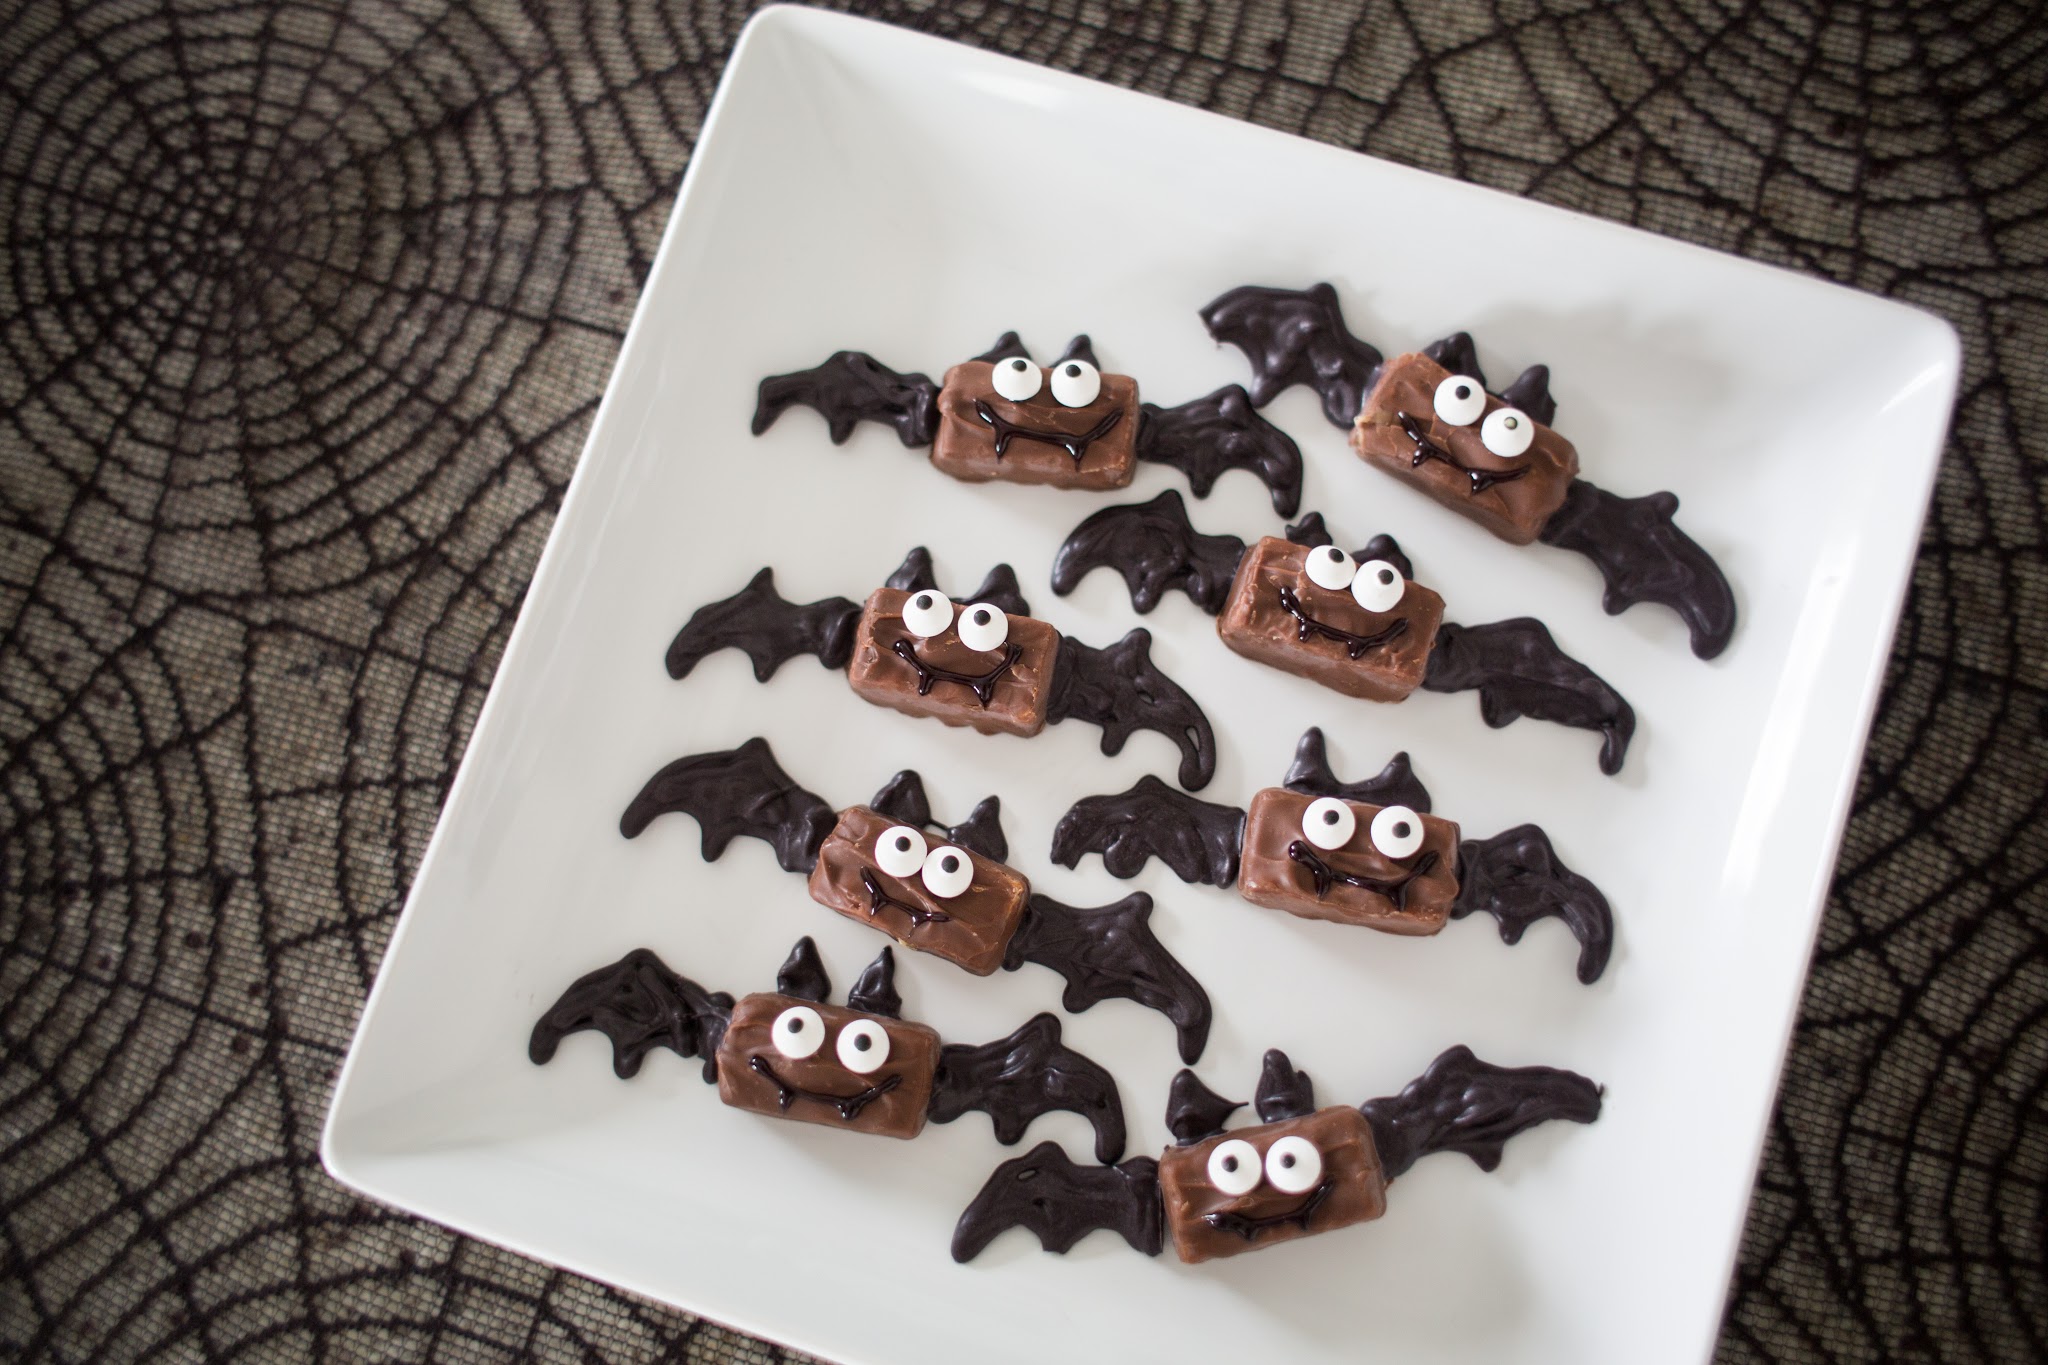 Cute Halloween Party Decorations and Treats